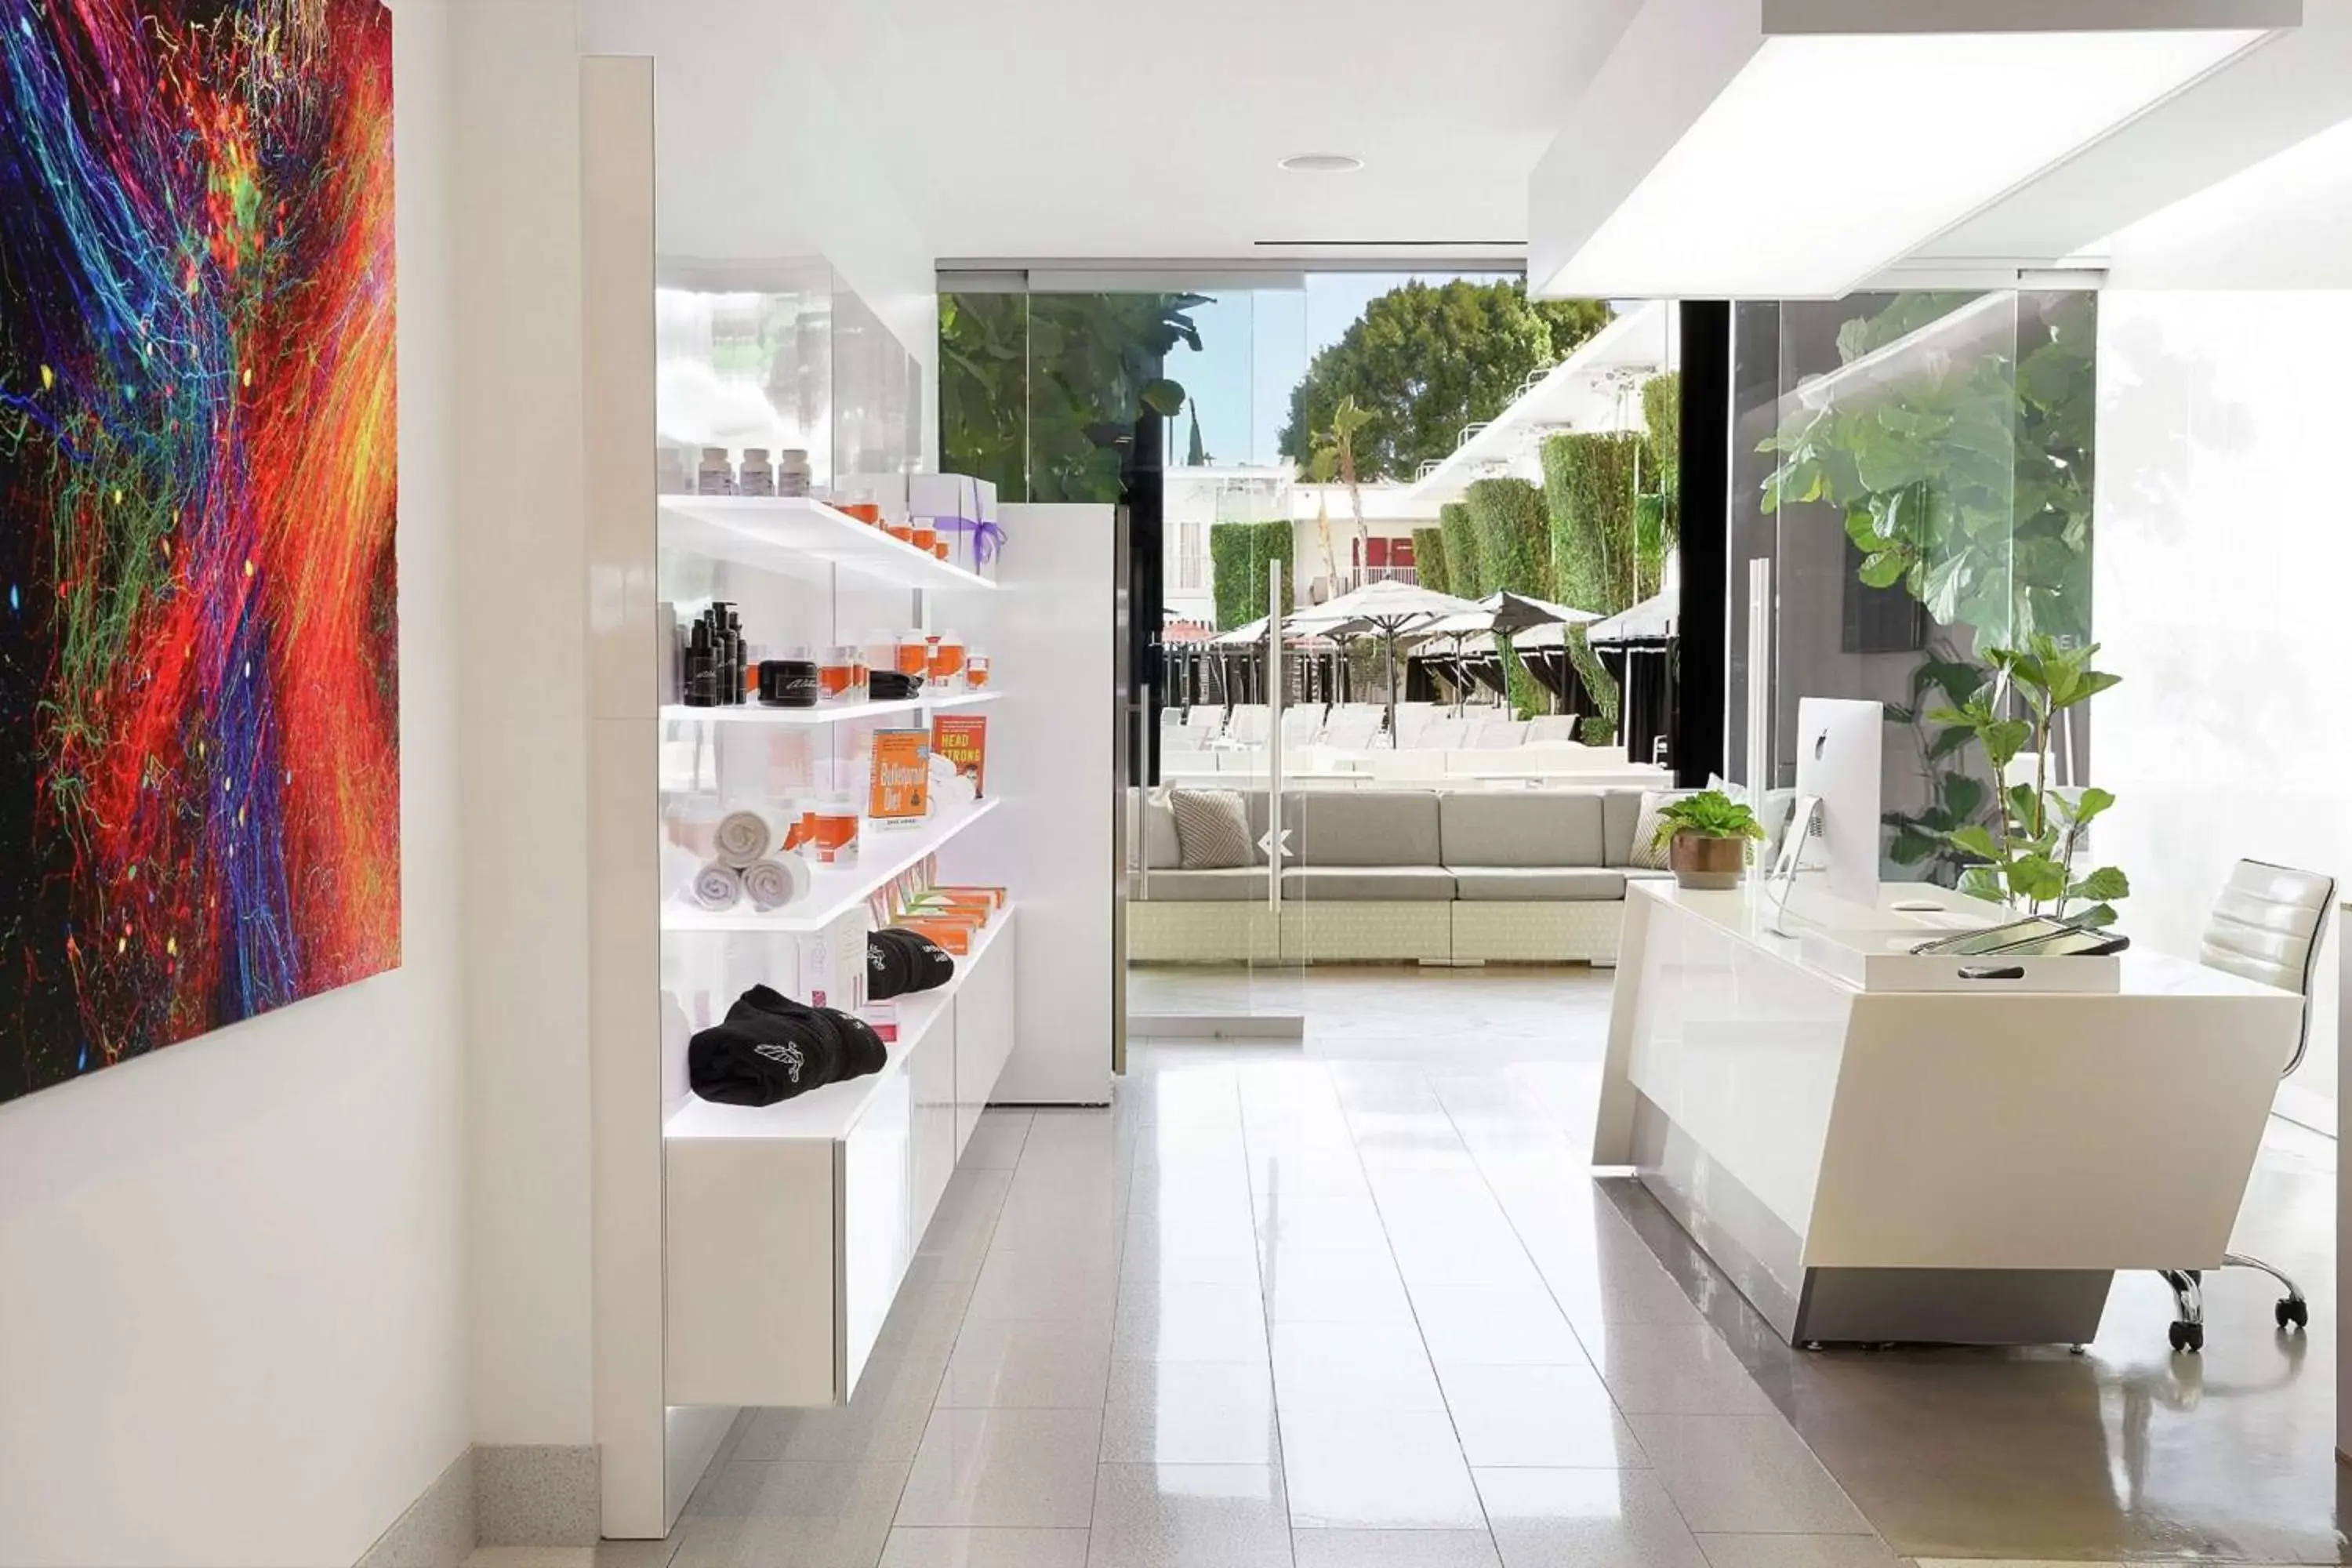 On-site shops in The Beverly Hilton